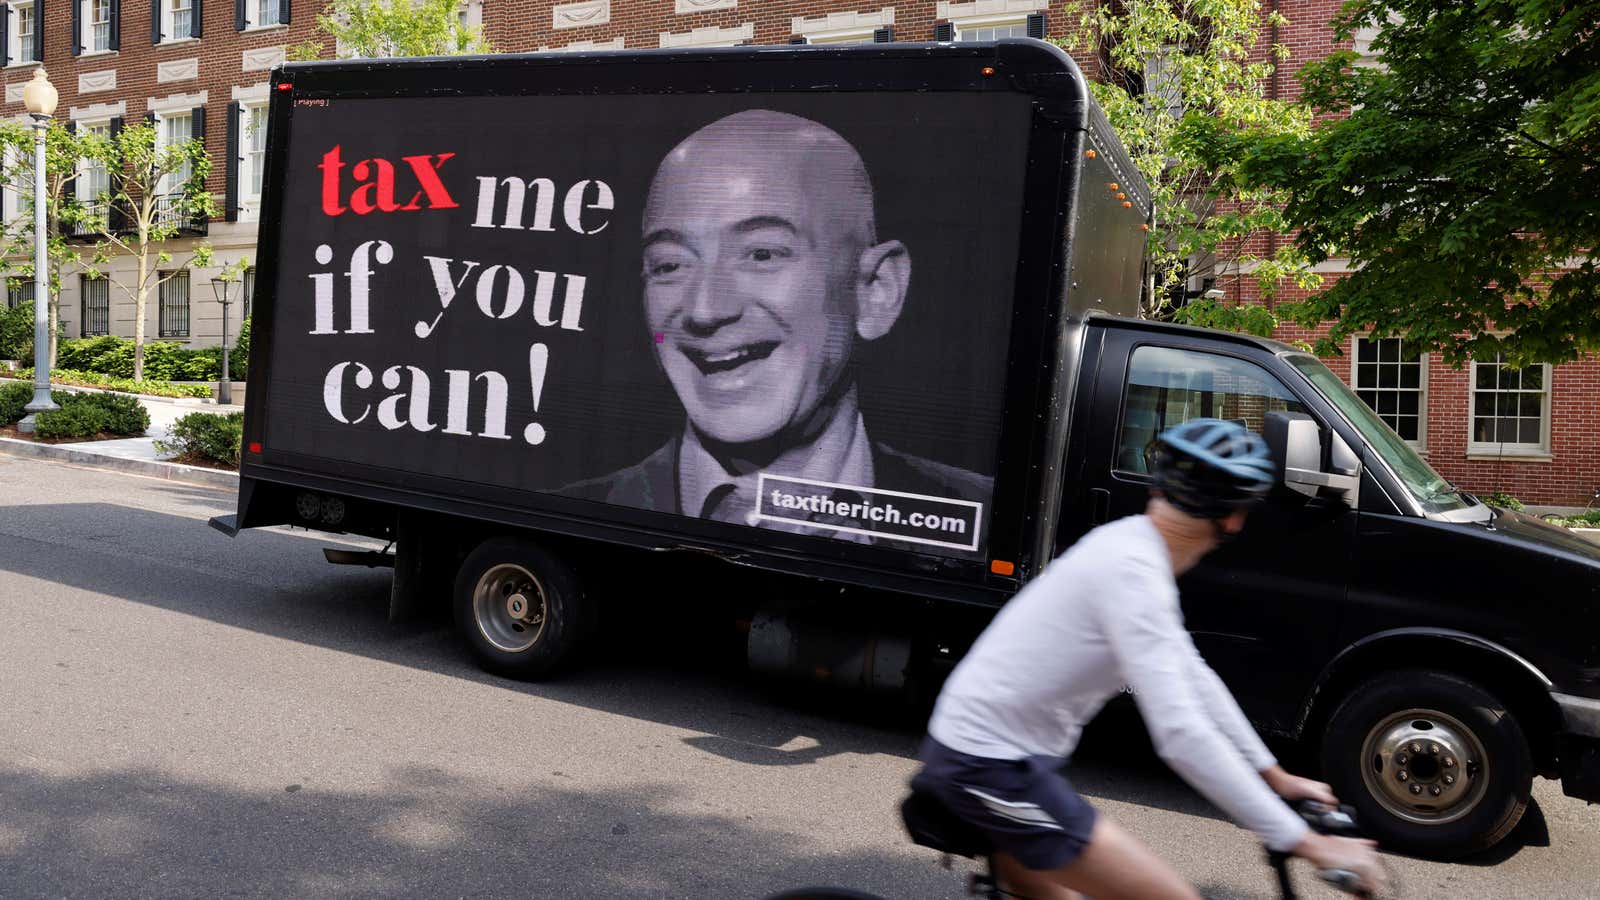 A new tax could catch up with billionaires like Bezos.